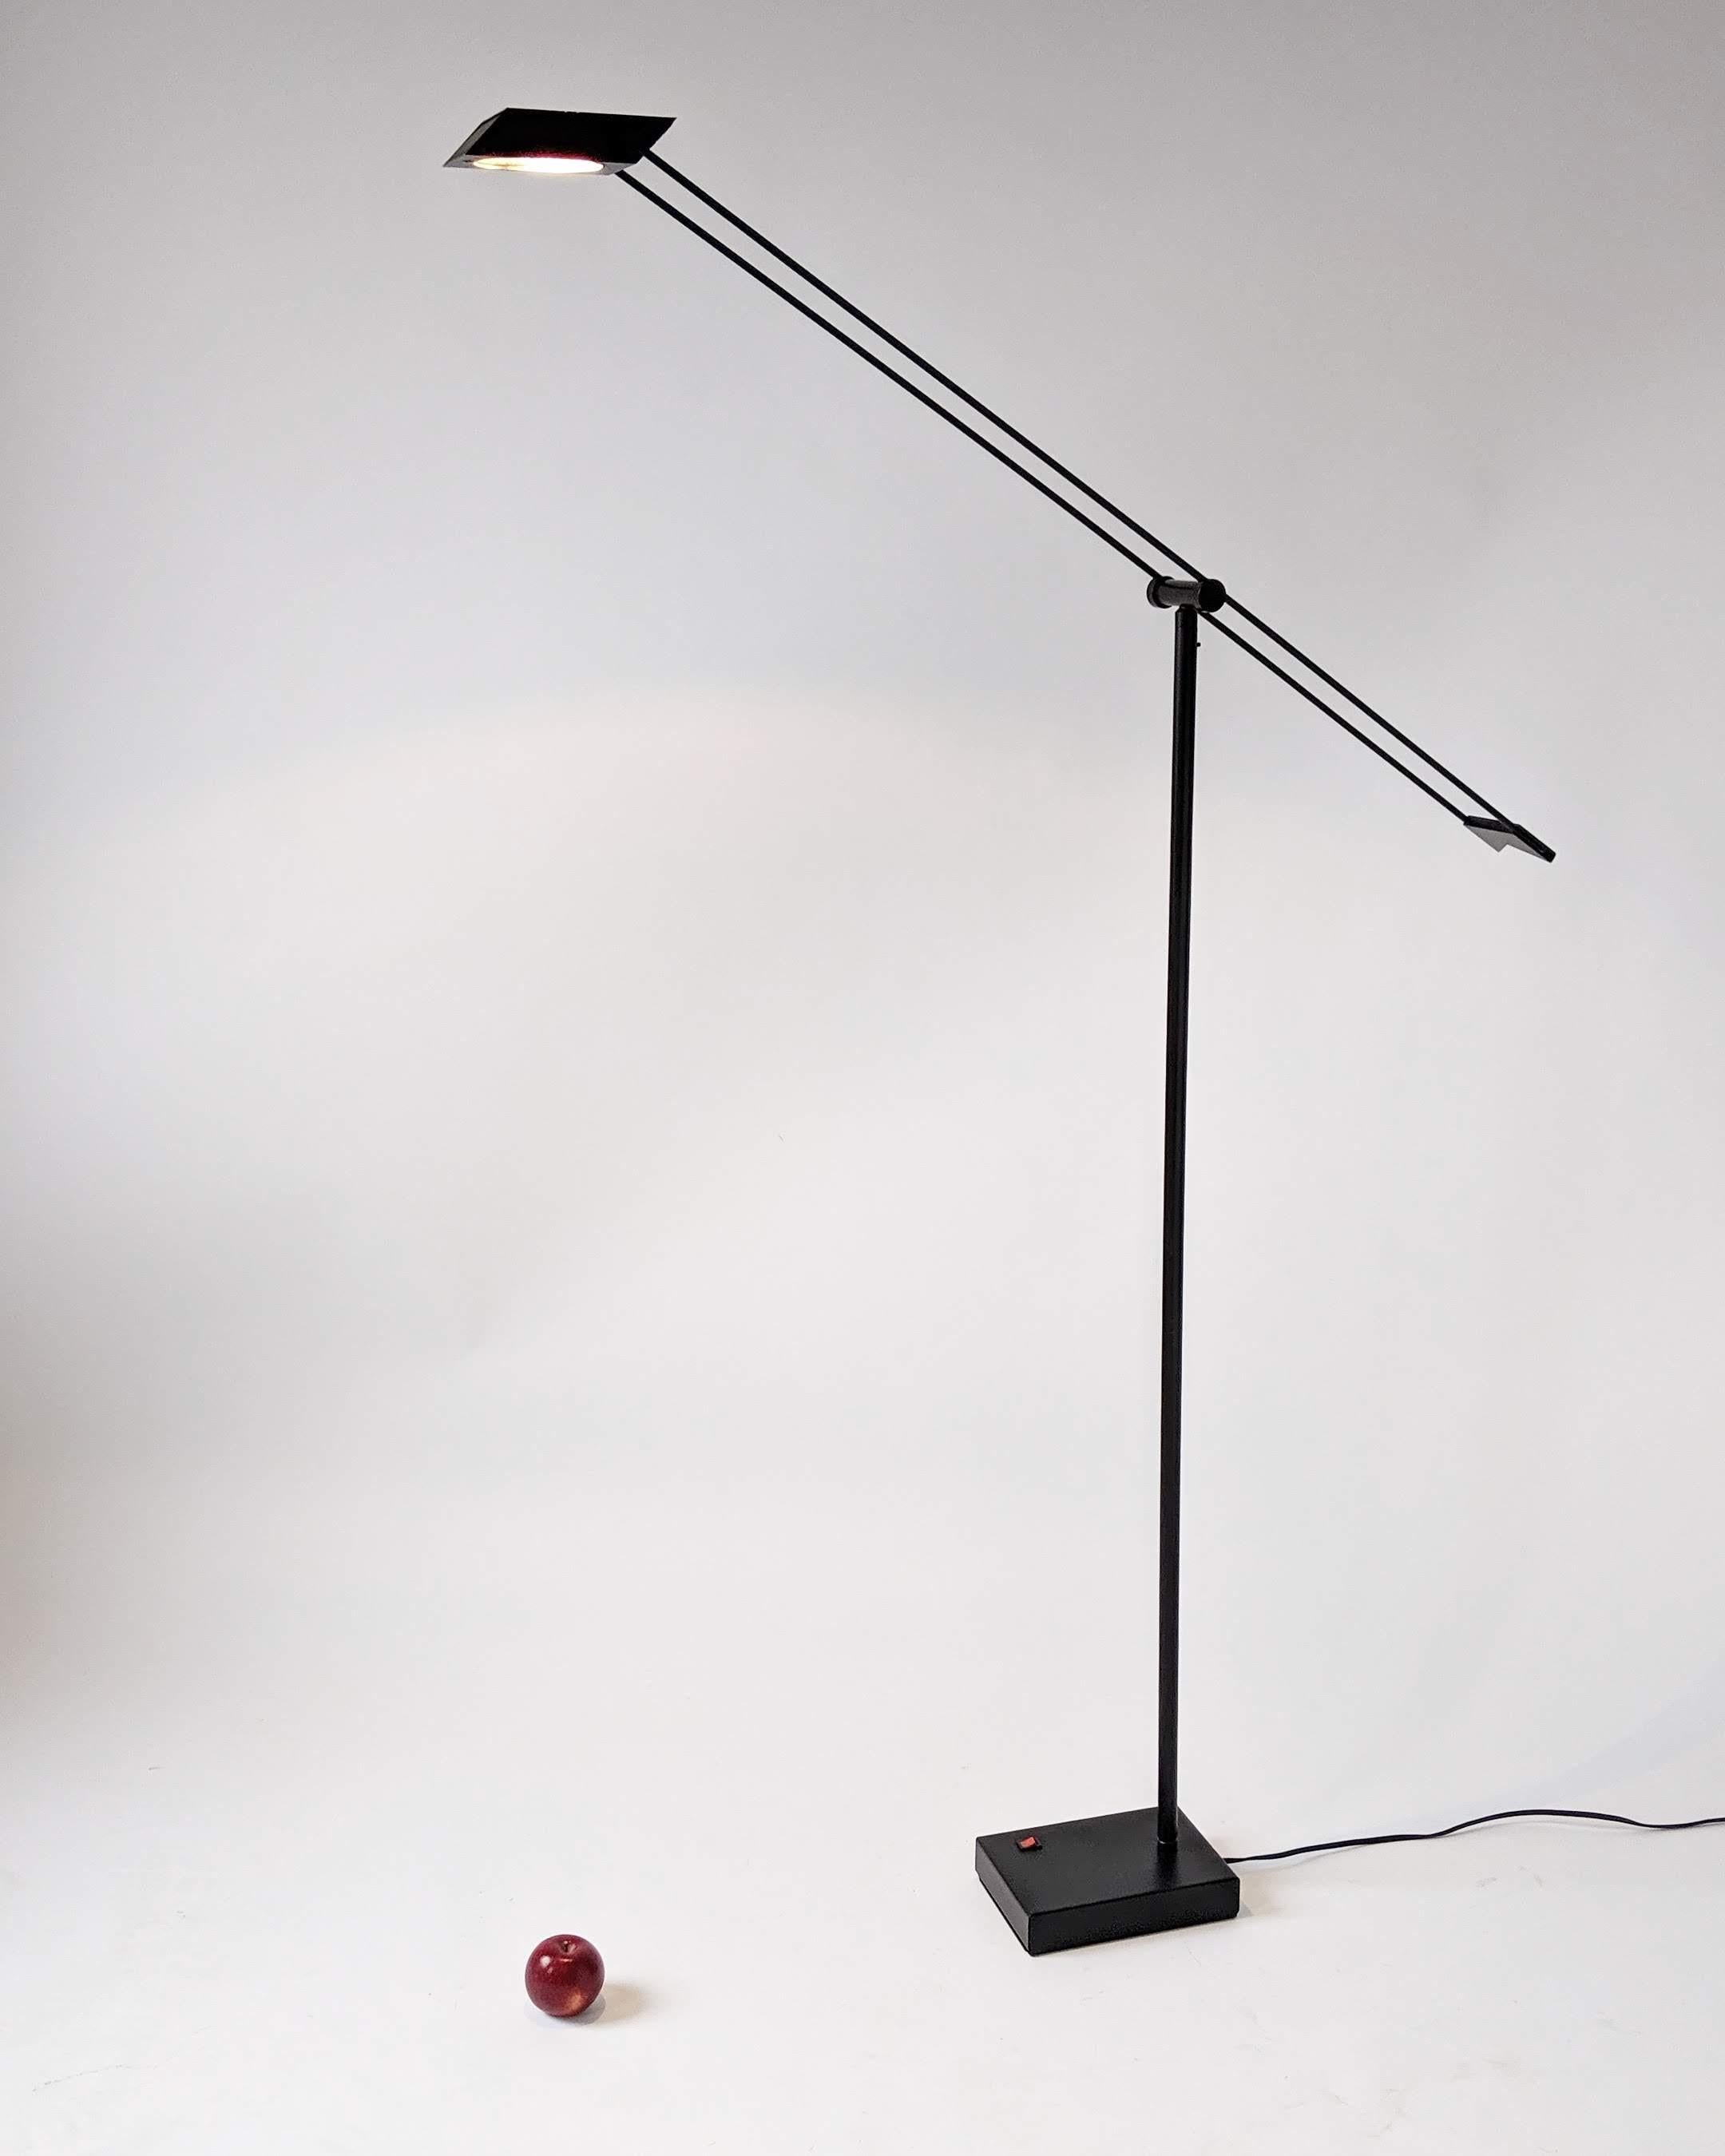 Minimalist modern halogen agile reading floor lamp.

Rotate on pole 180 degree left to right.

Measure: 68 in. straight up. Arm is 42 in. long. Main stem is 46 in. high.

Well made with prime quality material.

Toroidal transformer in